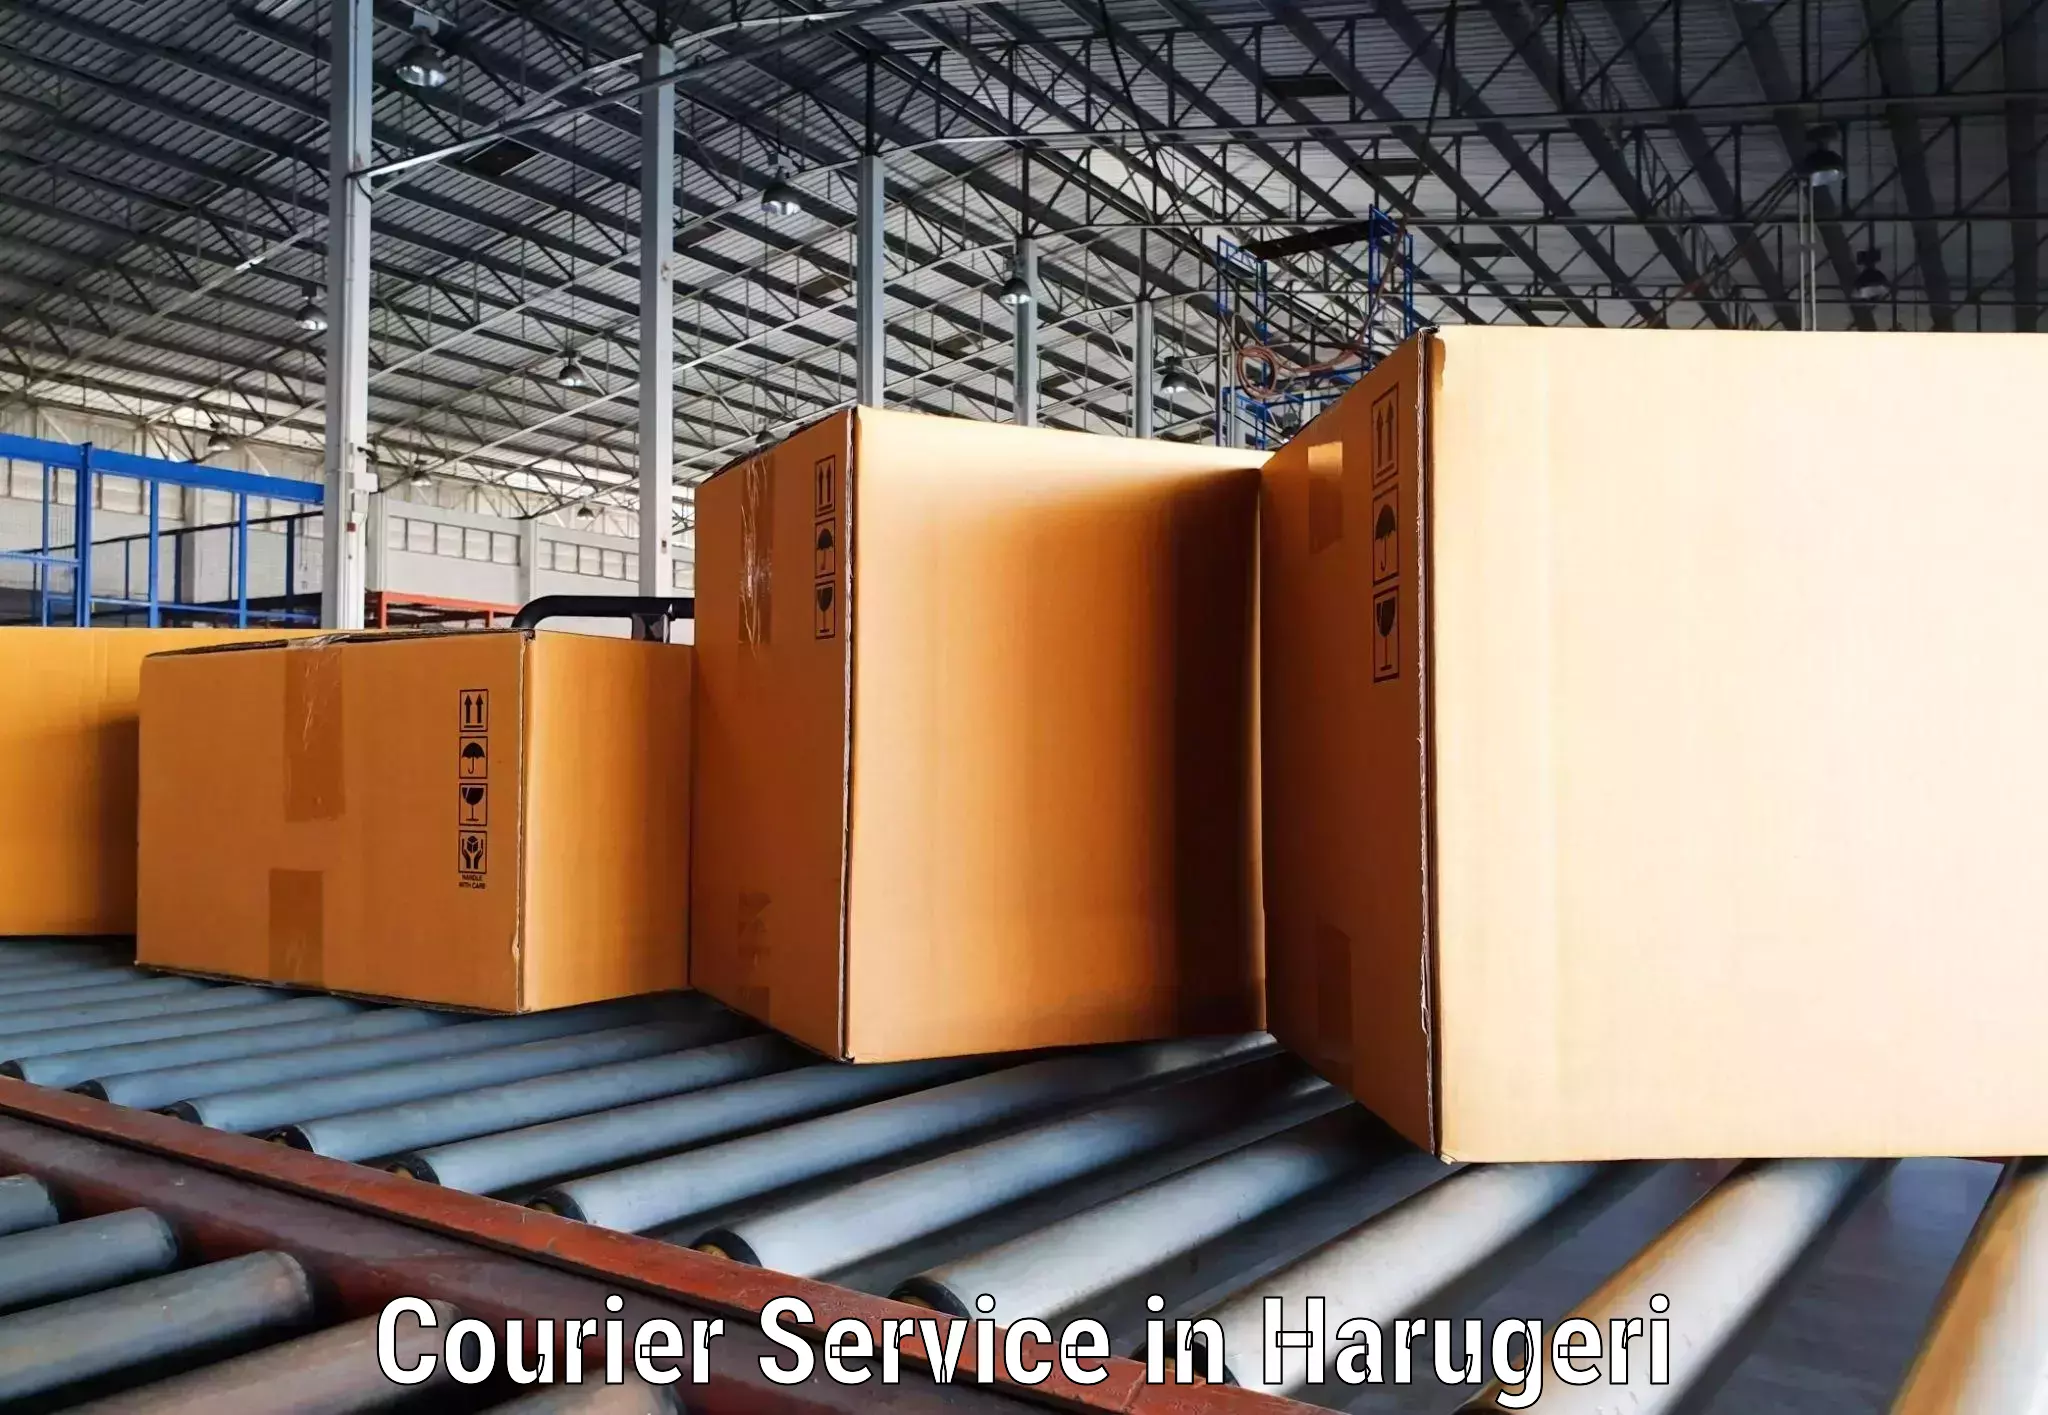 State-of-the-art courier technology in Harugeri